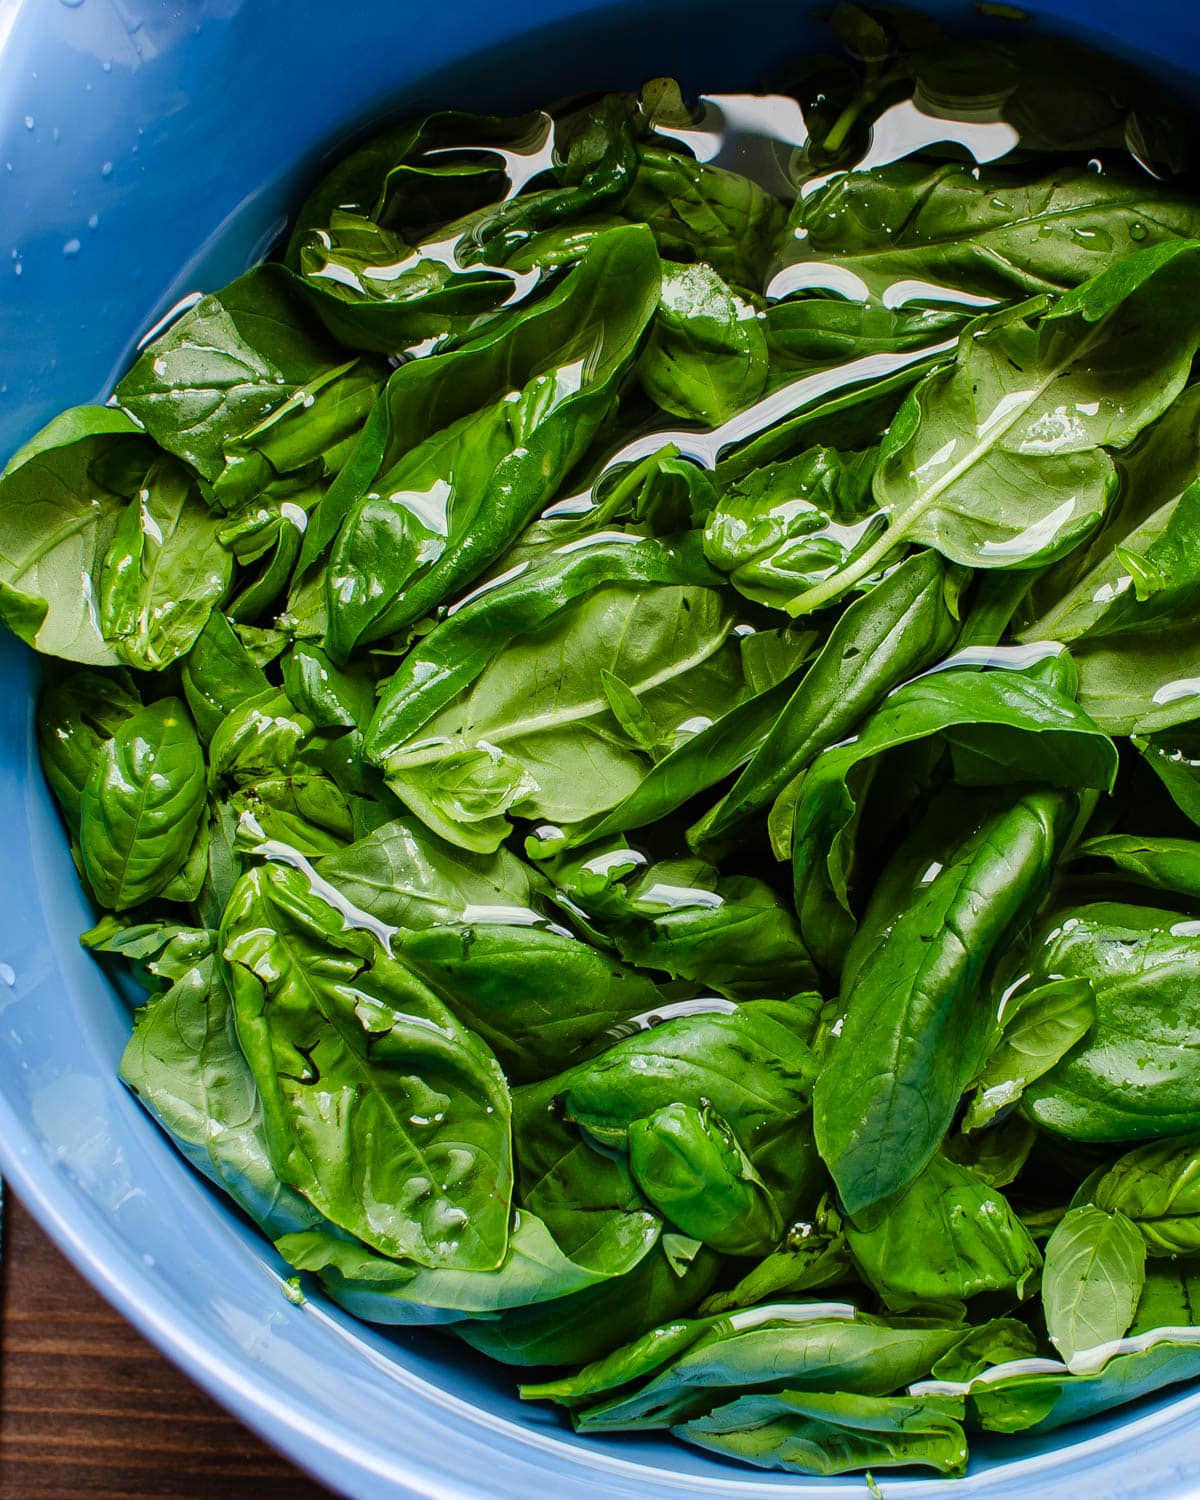 Rinsing the basil in a bowl of water.